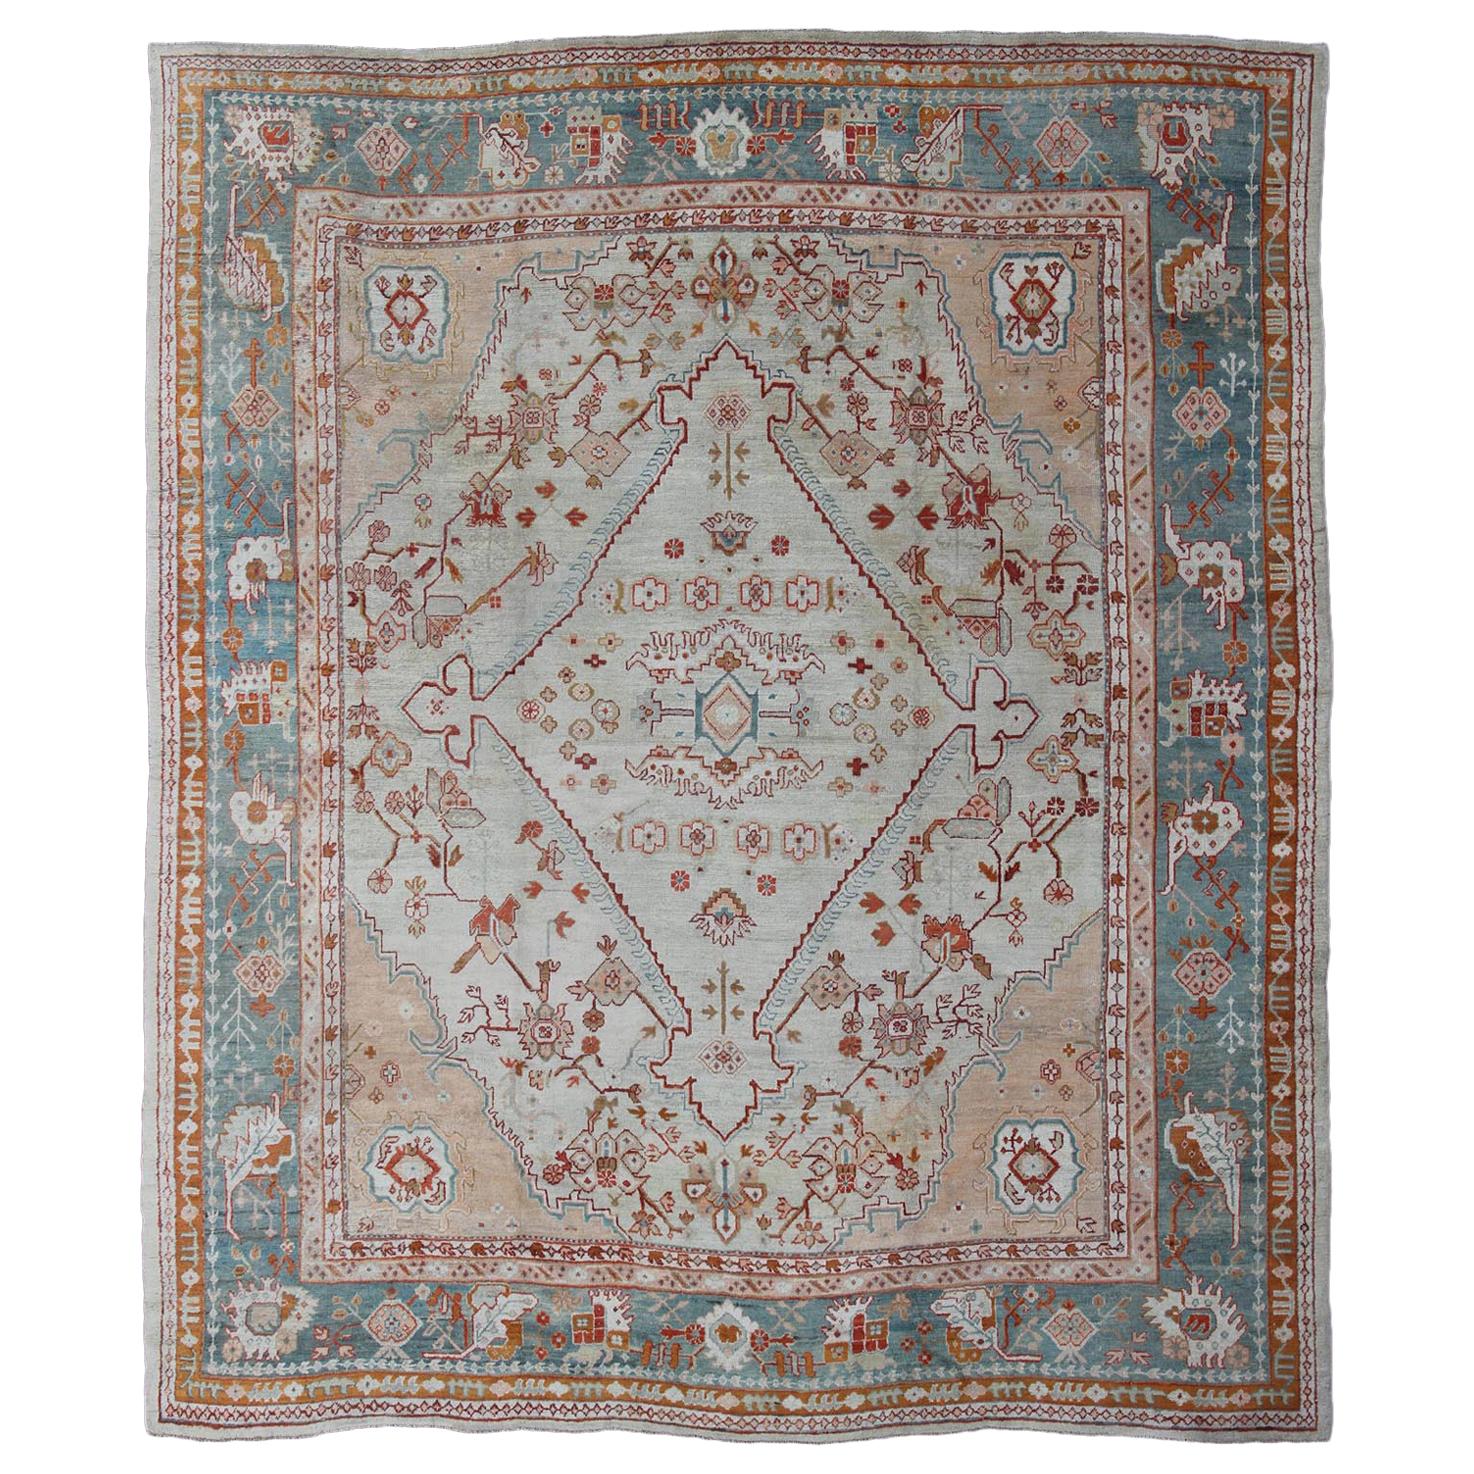 Antique Turkish Oushak Rug in Ice Blue, Taupe Background and Teal Border